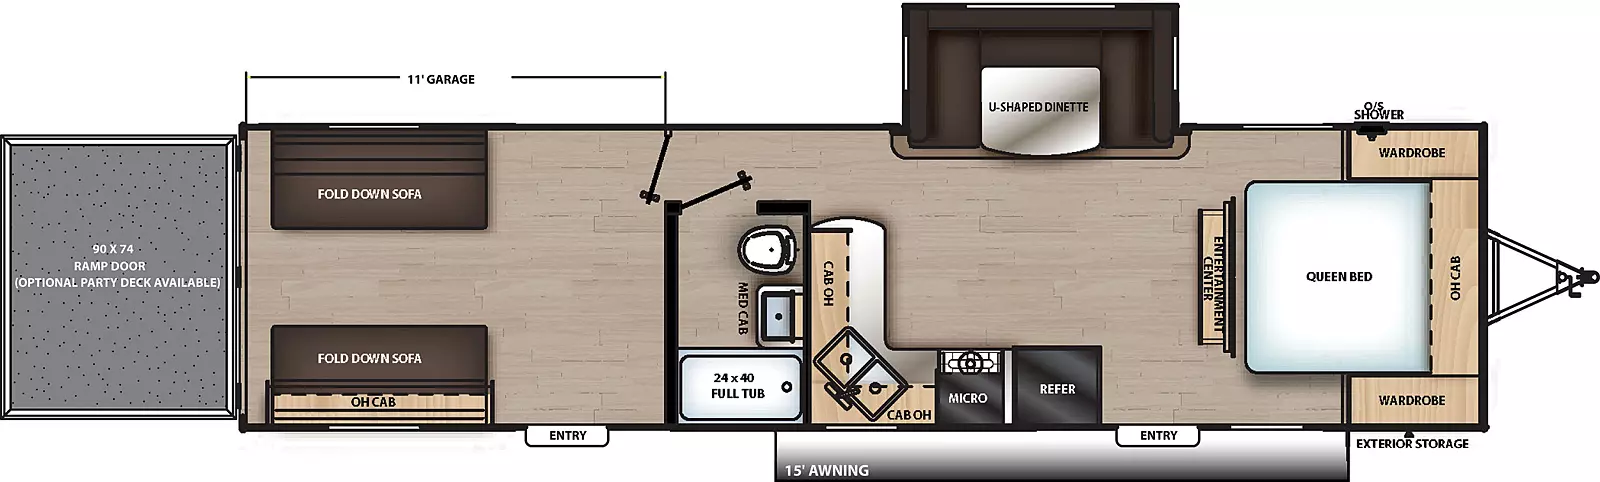 The 29ATH has one slide out on the off-door side and two entry doors on the door side. Interior layout from front to back: foot facing queen bed with overhead cabinet and wardrobes on either side; entertainment center; off-door side slide out containing u-shaped dinette; door side kitchen containing refrigerator, cook top stove, microwave cabinet, double basin sink, and overhead cabinet; door side bathroom; and dinette table with fold down sofa.